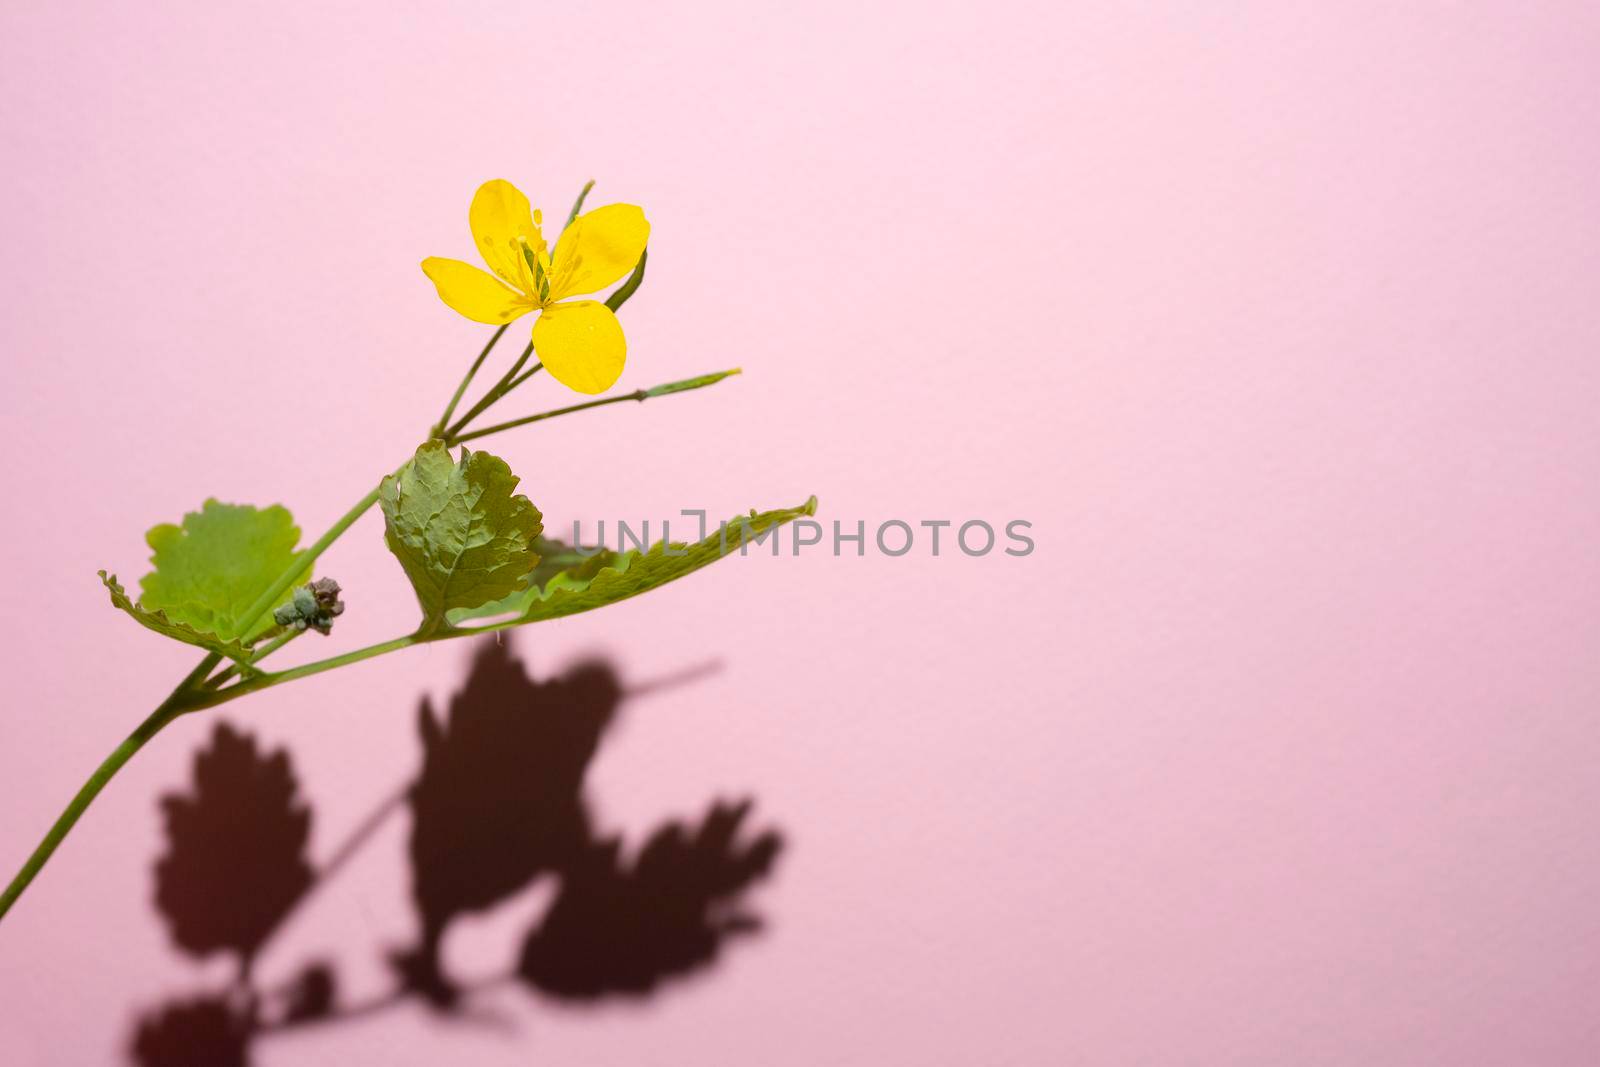 Common buttercup by sergiodv